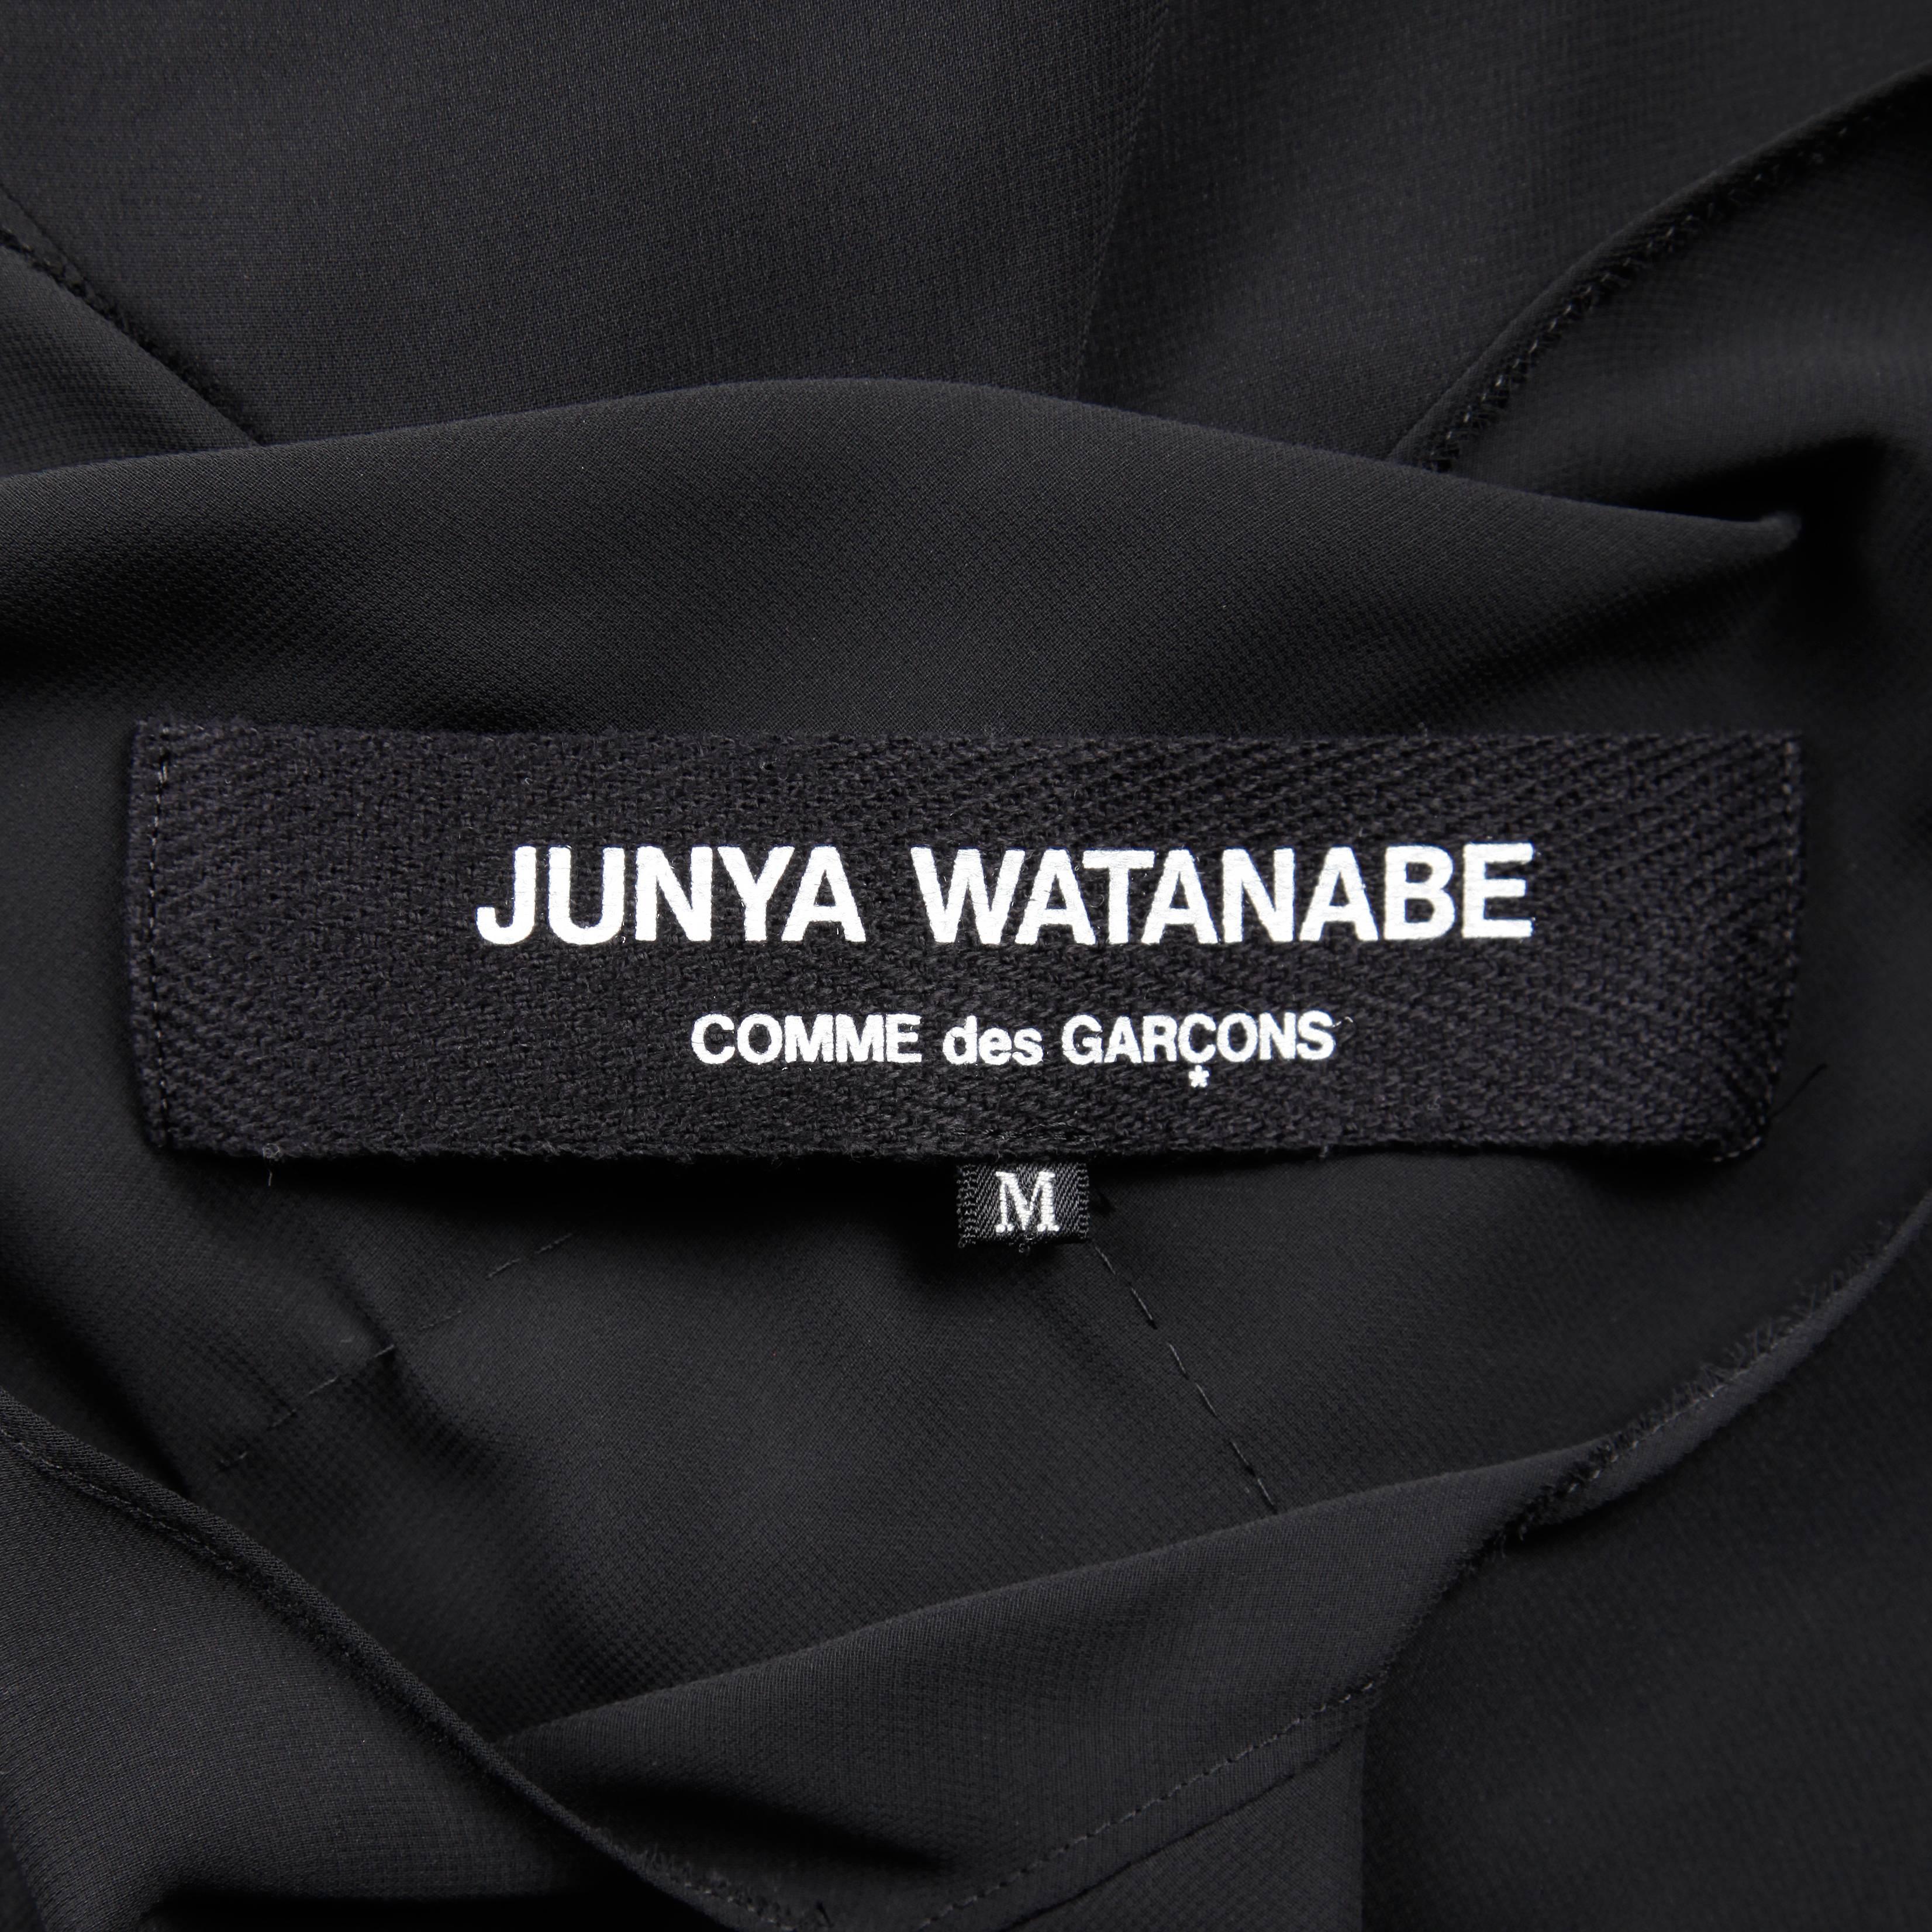 Incredible Junya Watanabe for Comme des Garcons black avant garde draped dress. Partially lined, no closure (pulls on over the head). The marked size is medium. The bust measures 36", waist 28", hips 35" and the total length 45".